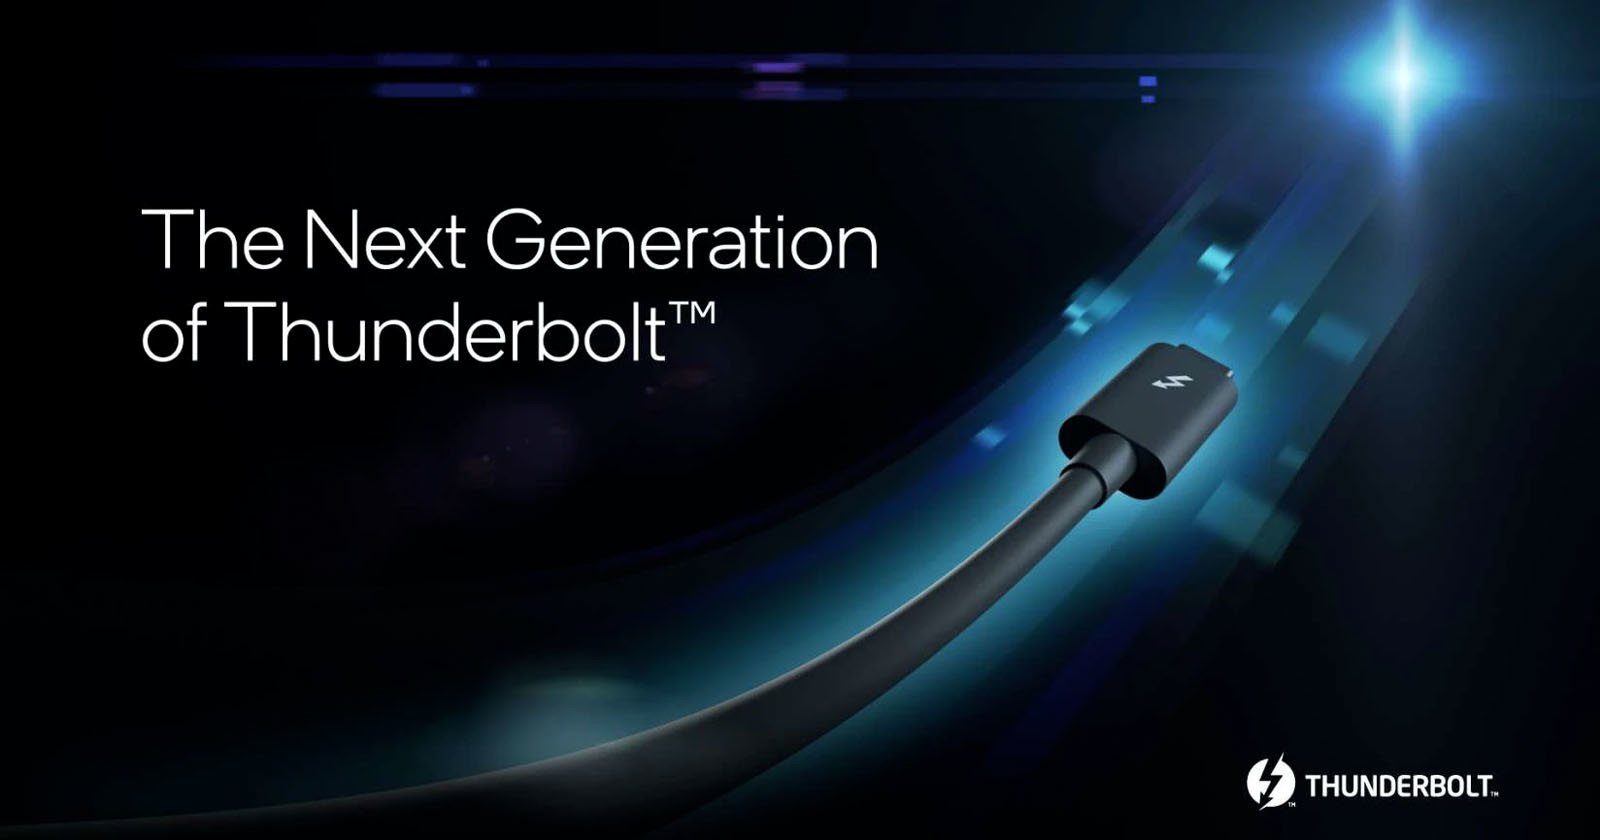 Intel Shows Off Prototype for the Next Generation of Thunderbolt